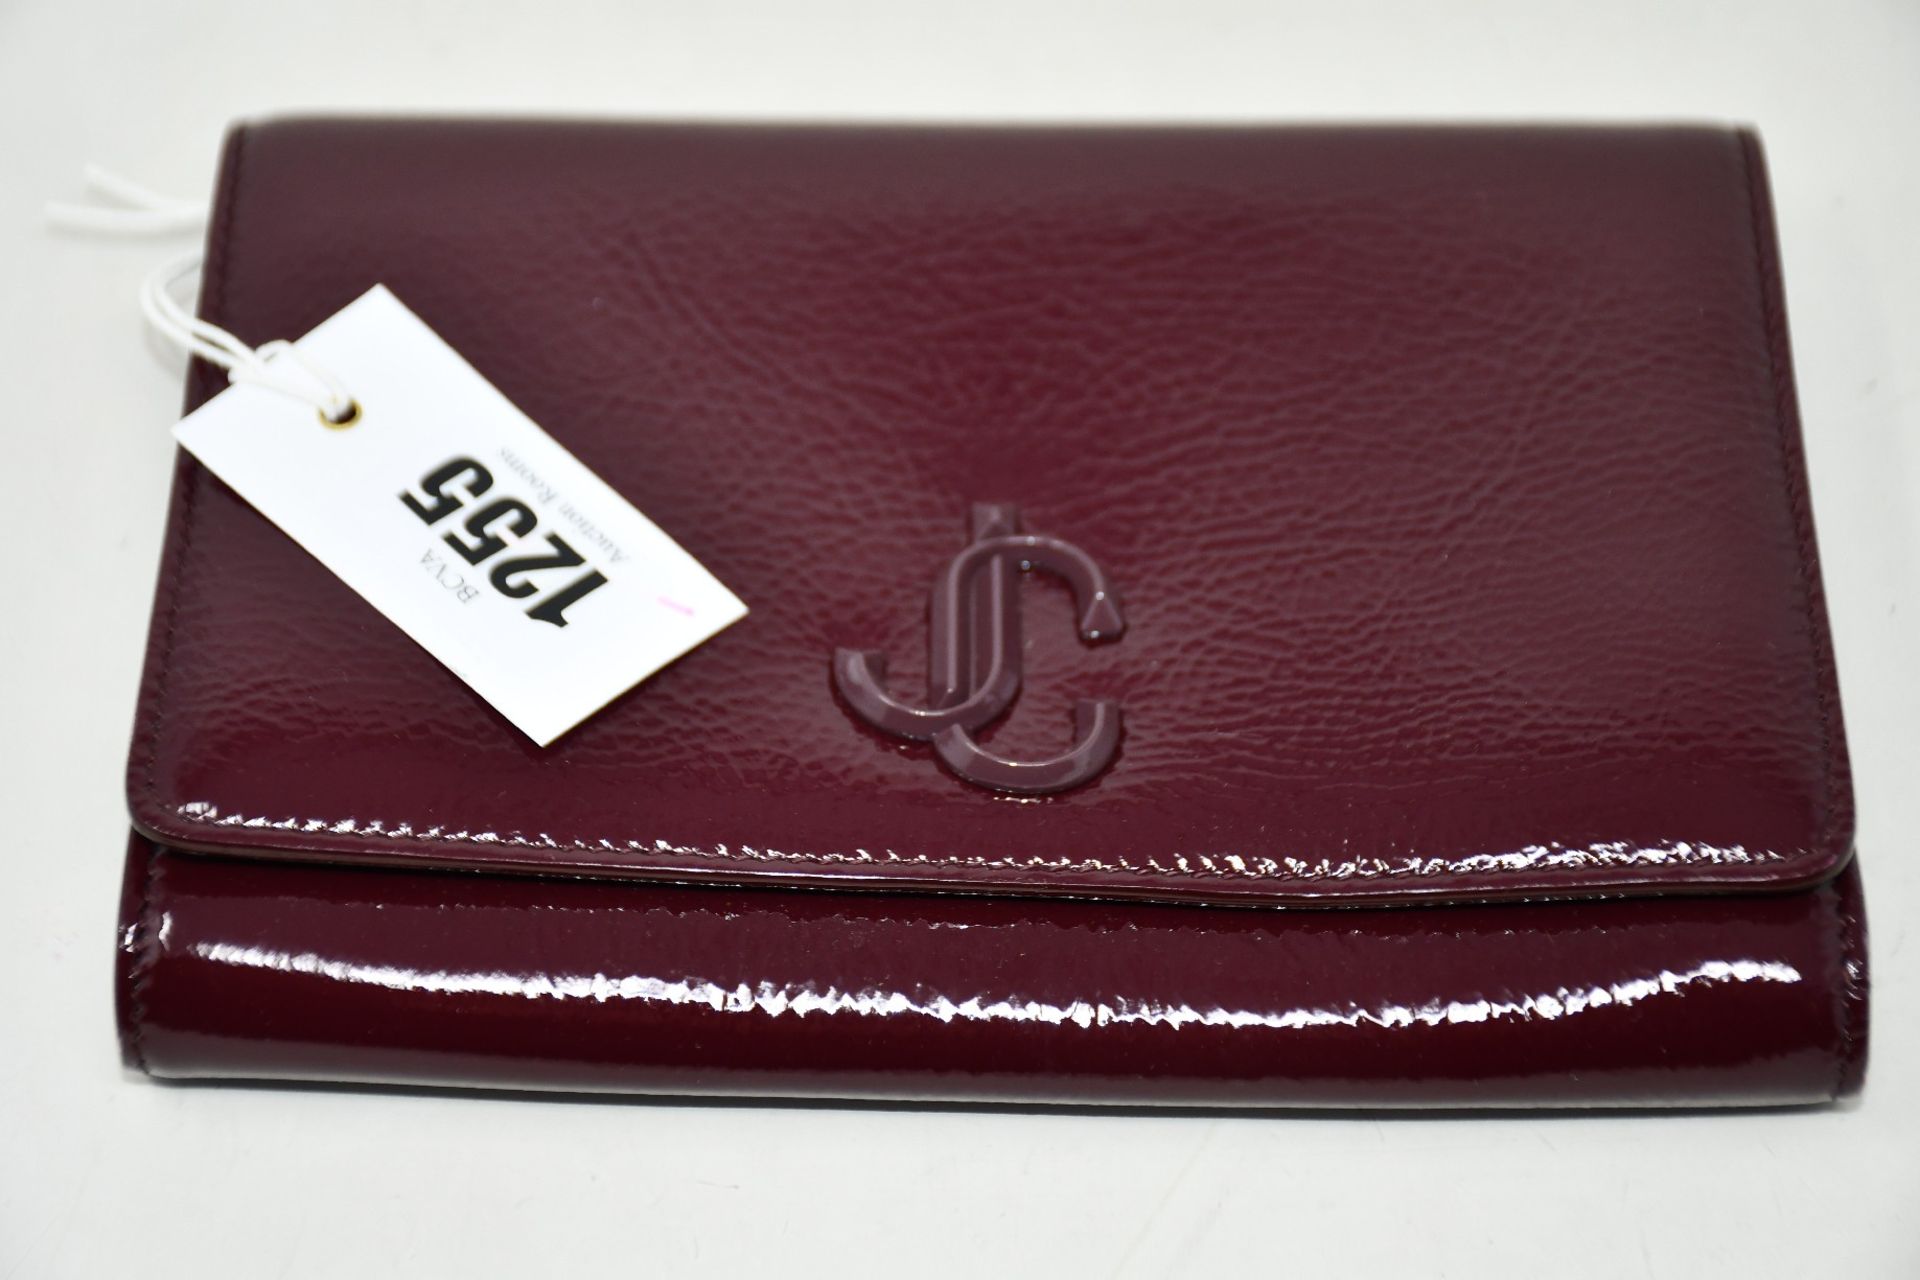 An as new Jimmy Choo Varenne clutch in merlot (No tags but item is as new - RRP £695).